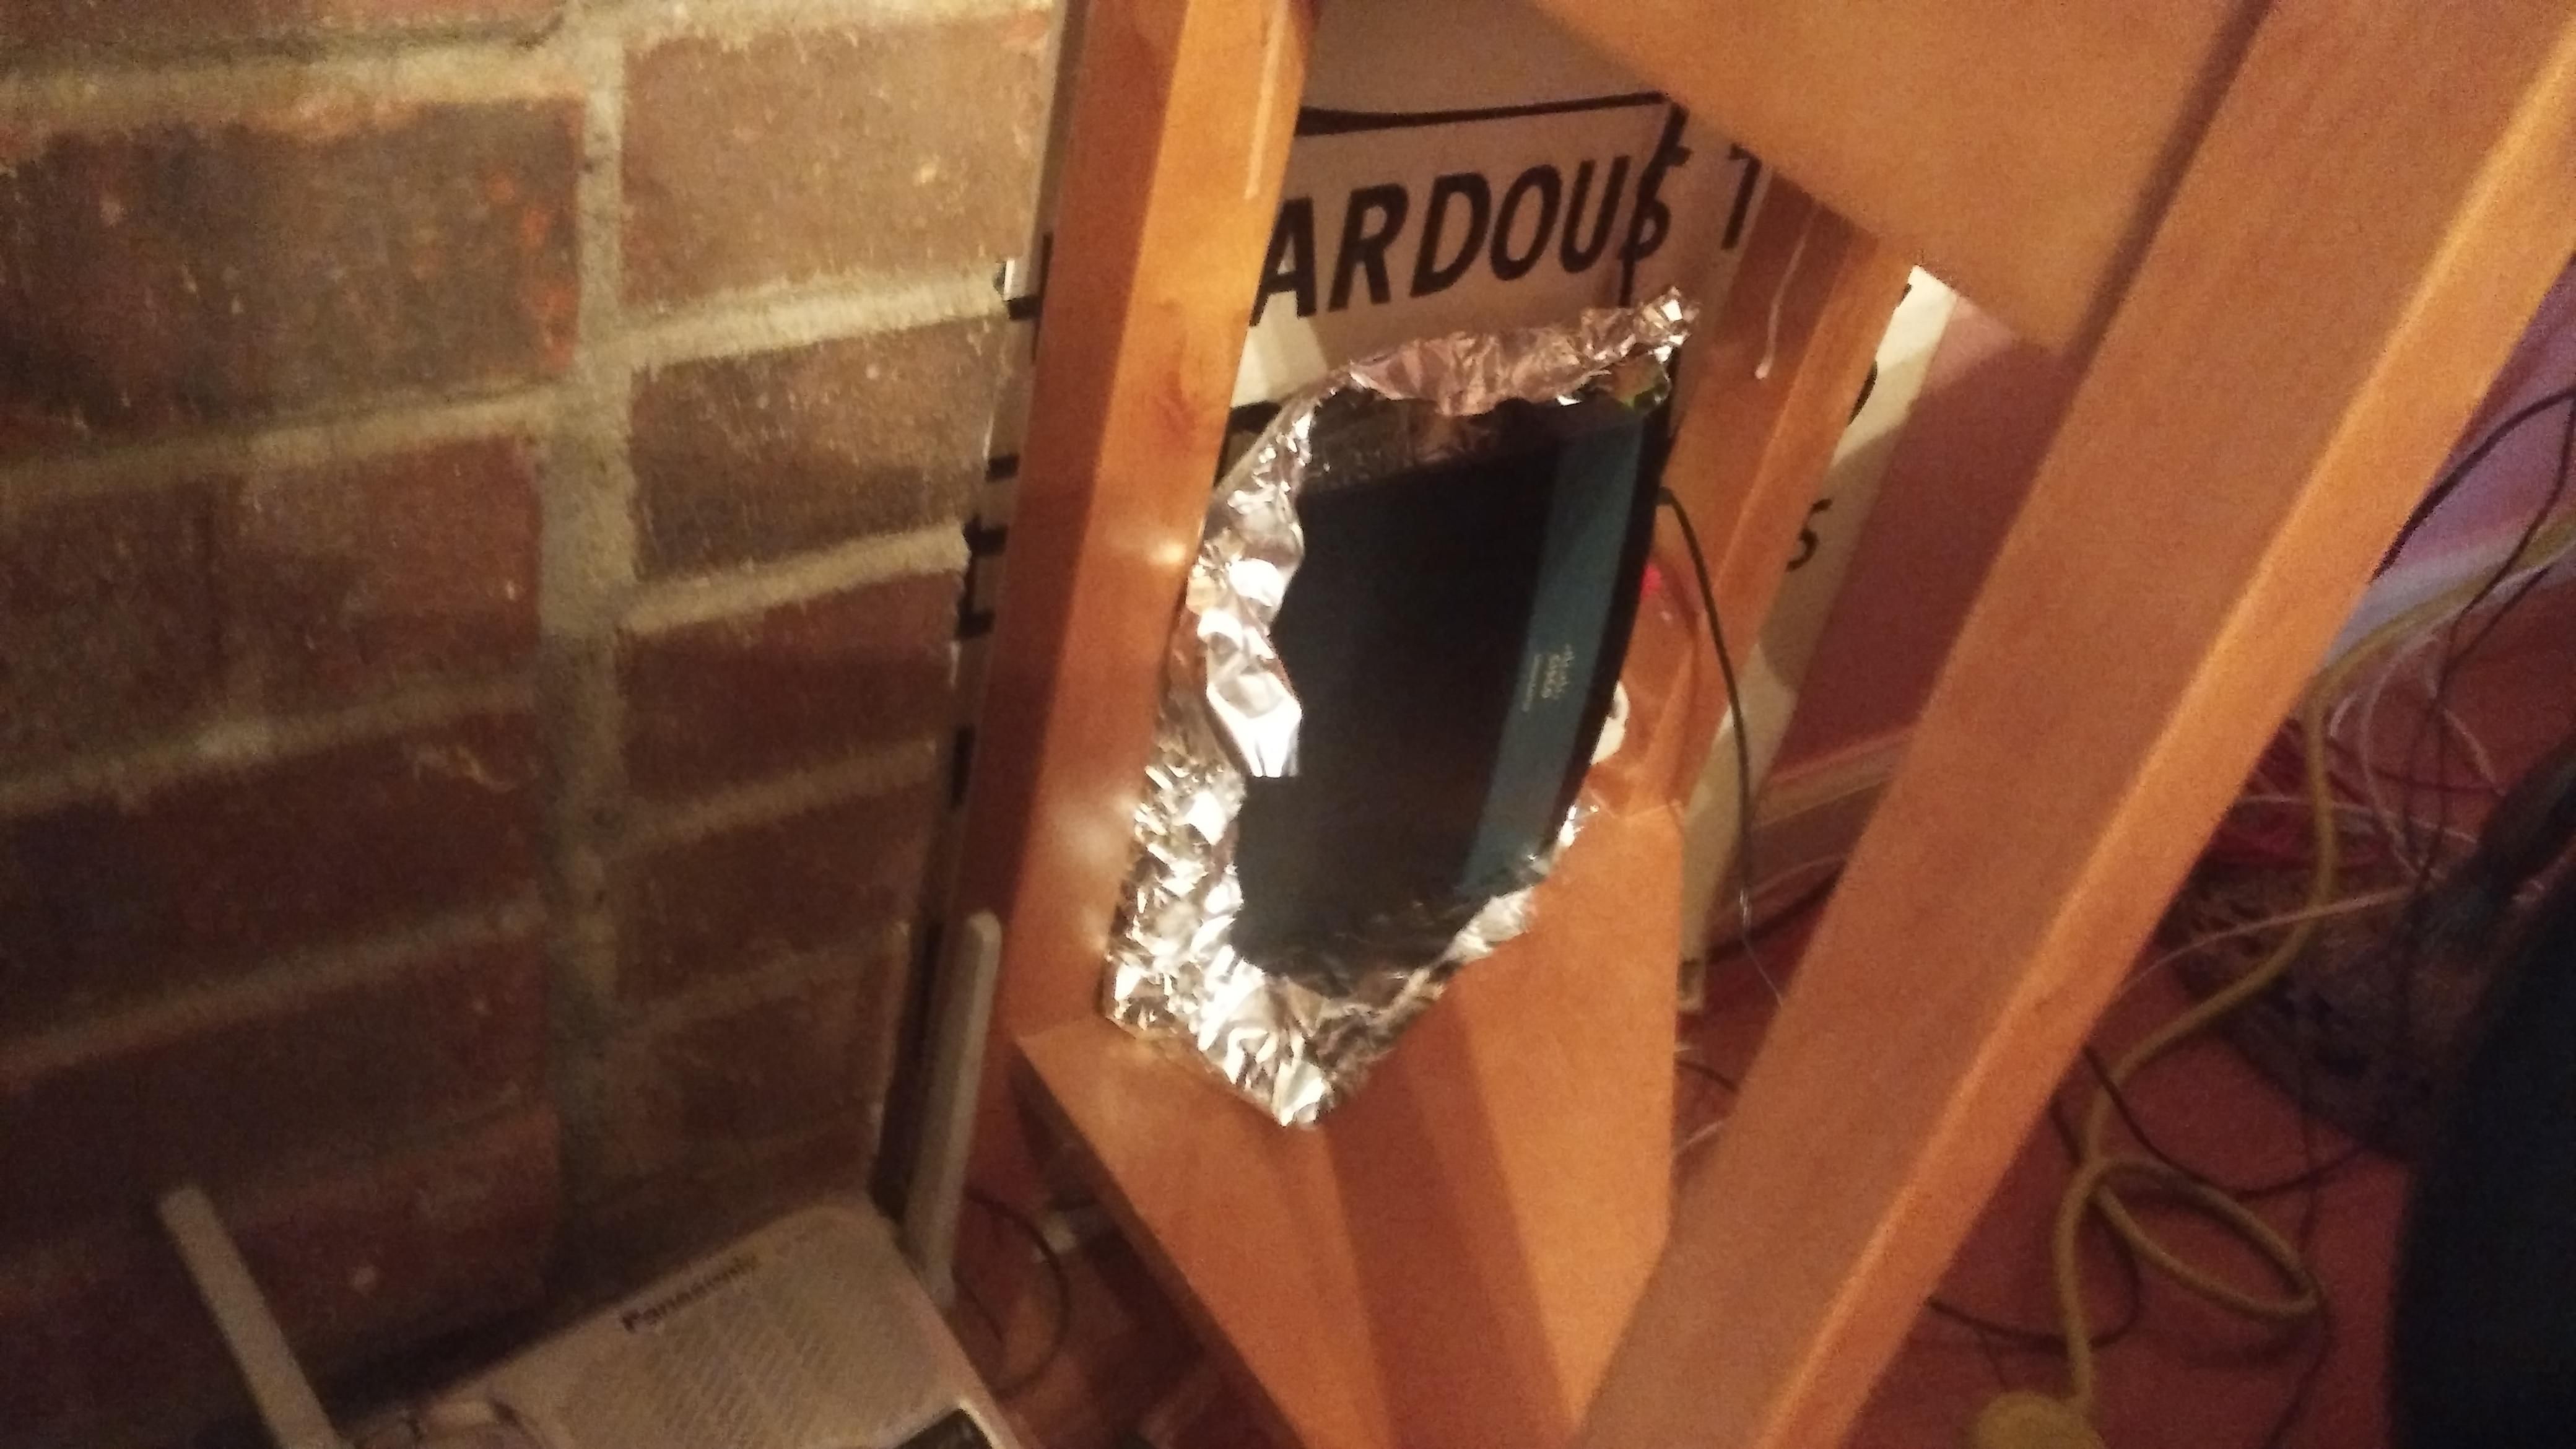 My stepdad put Tinfoil over the router to stop people from hacking it.